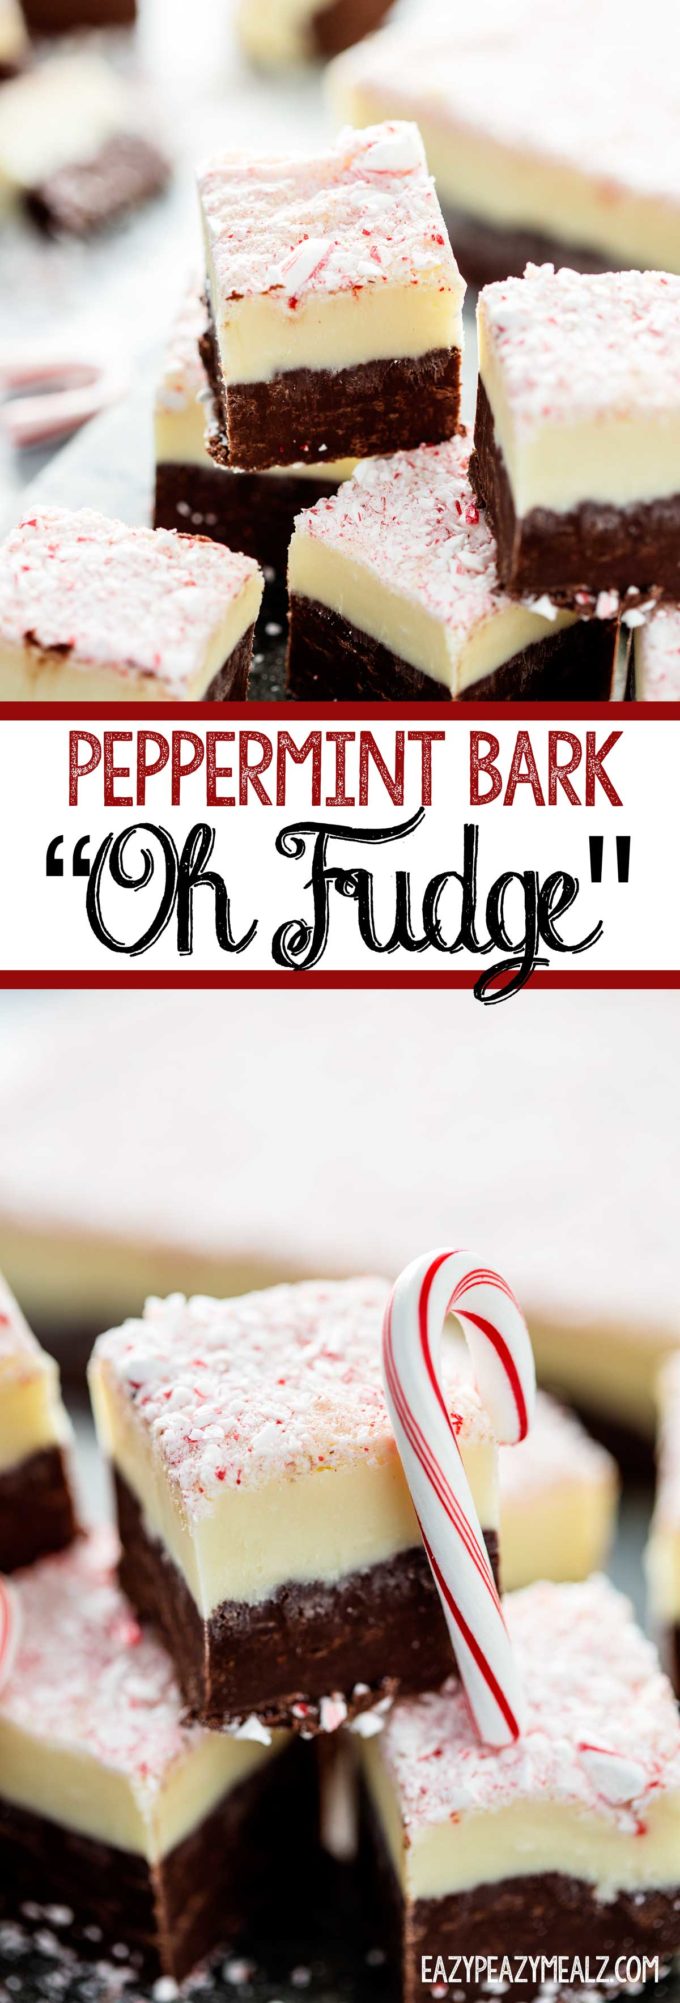 Tasty and easy to make peppermint bark fudge inspired by A Christmas Story house visit!